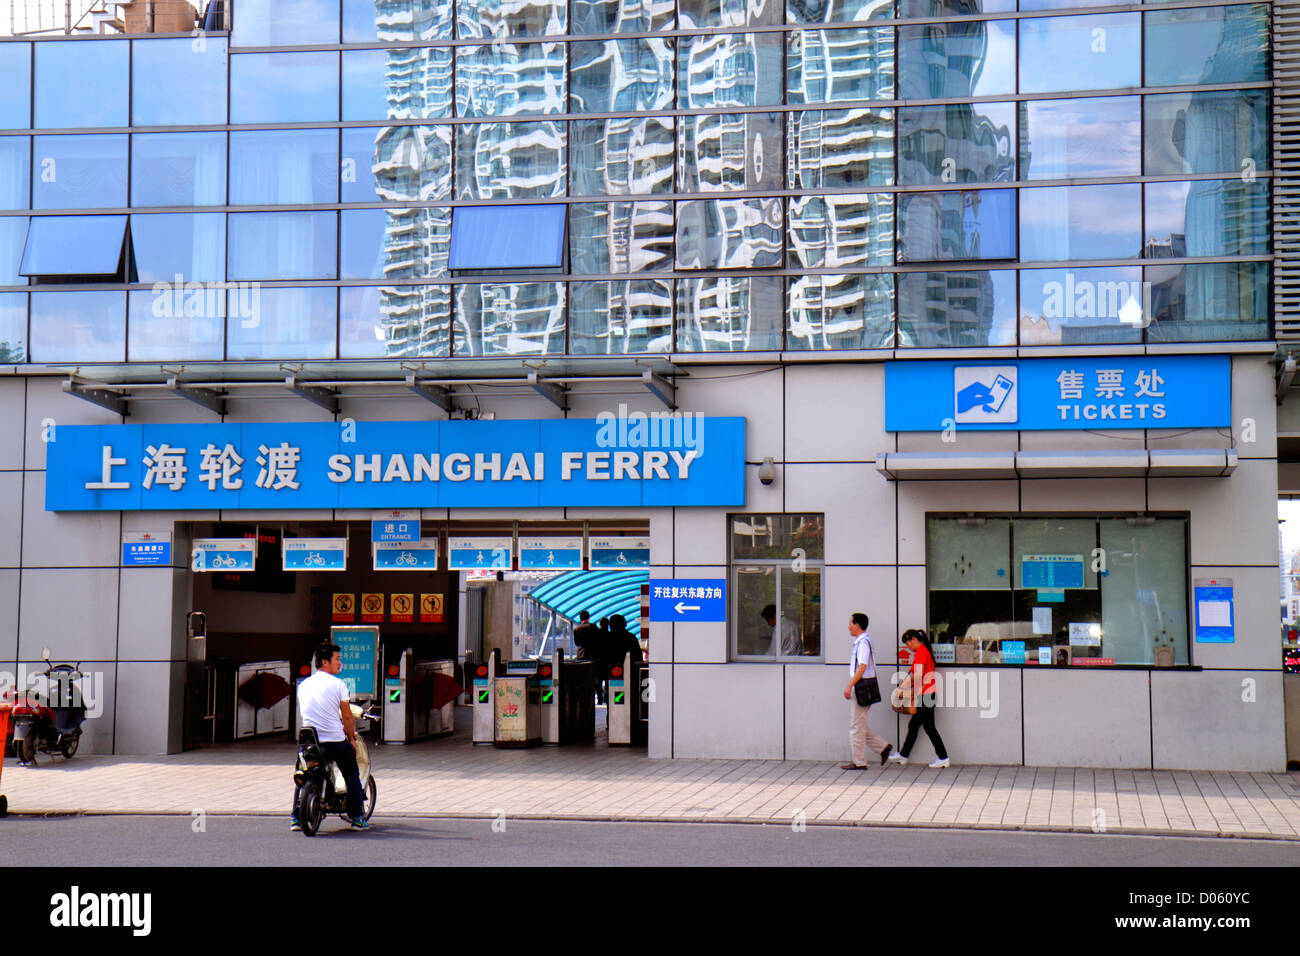 Shanghai China,Chinese Pudong Xin Quinn District,Dongchang Road,Jinling East Road Dongchang Road Ferry,ticket window,building,entrance,front,Mandarin, Stock Photo